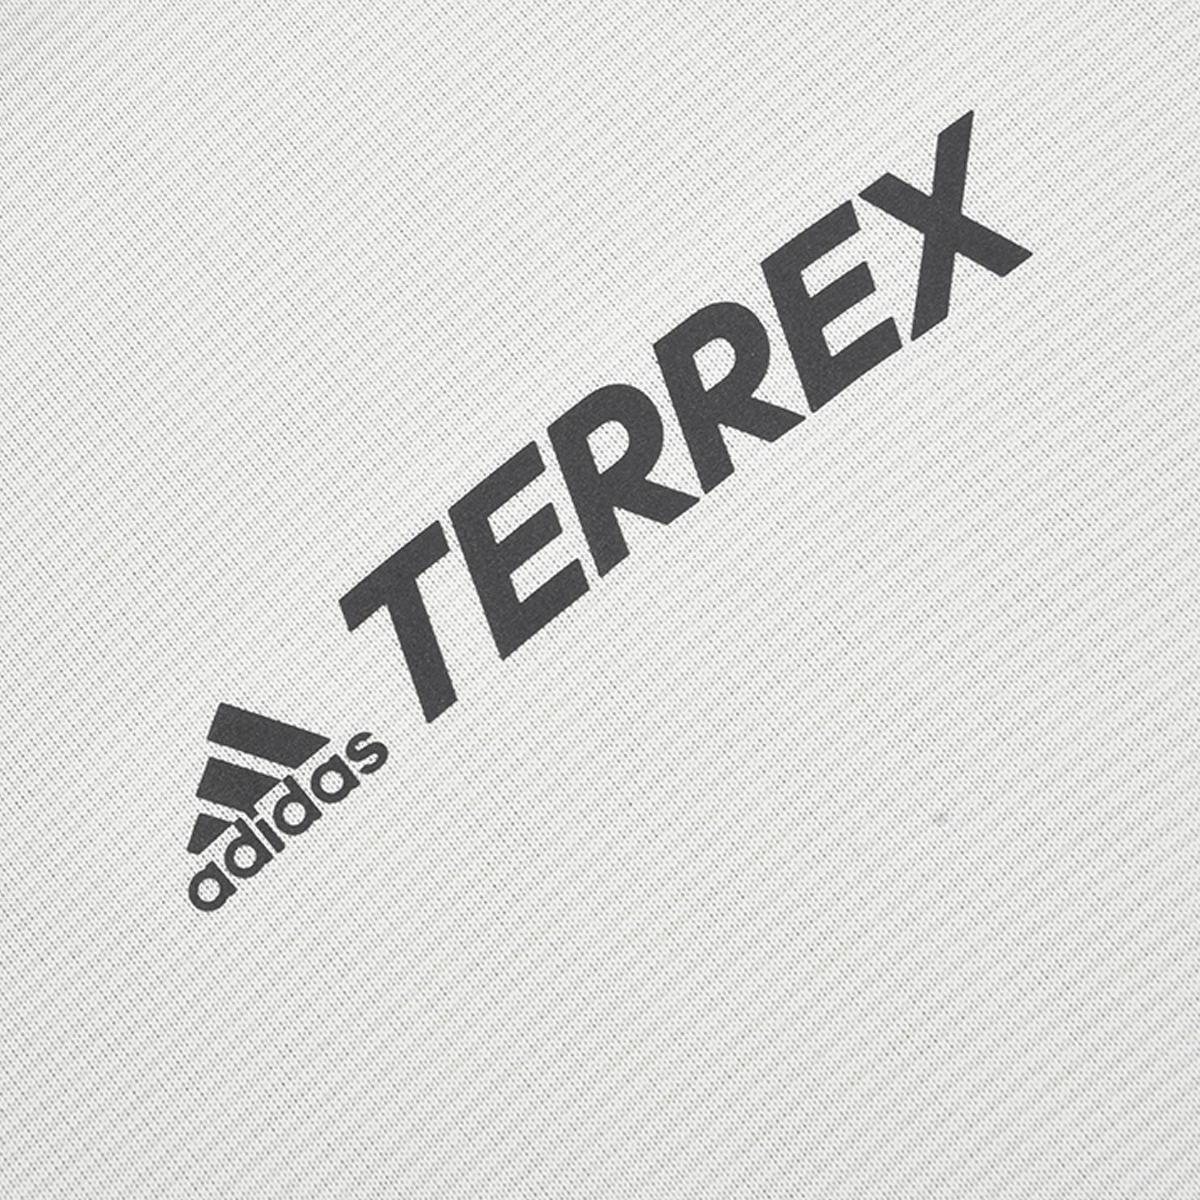 Remera Outdoor adidas Terrex Multi Hombre,  image number null